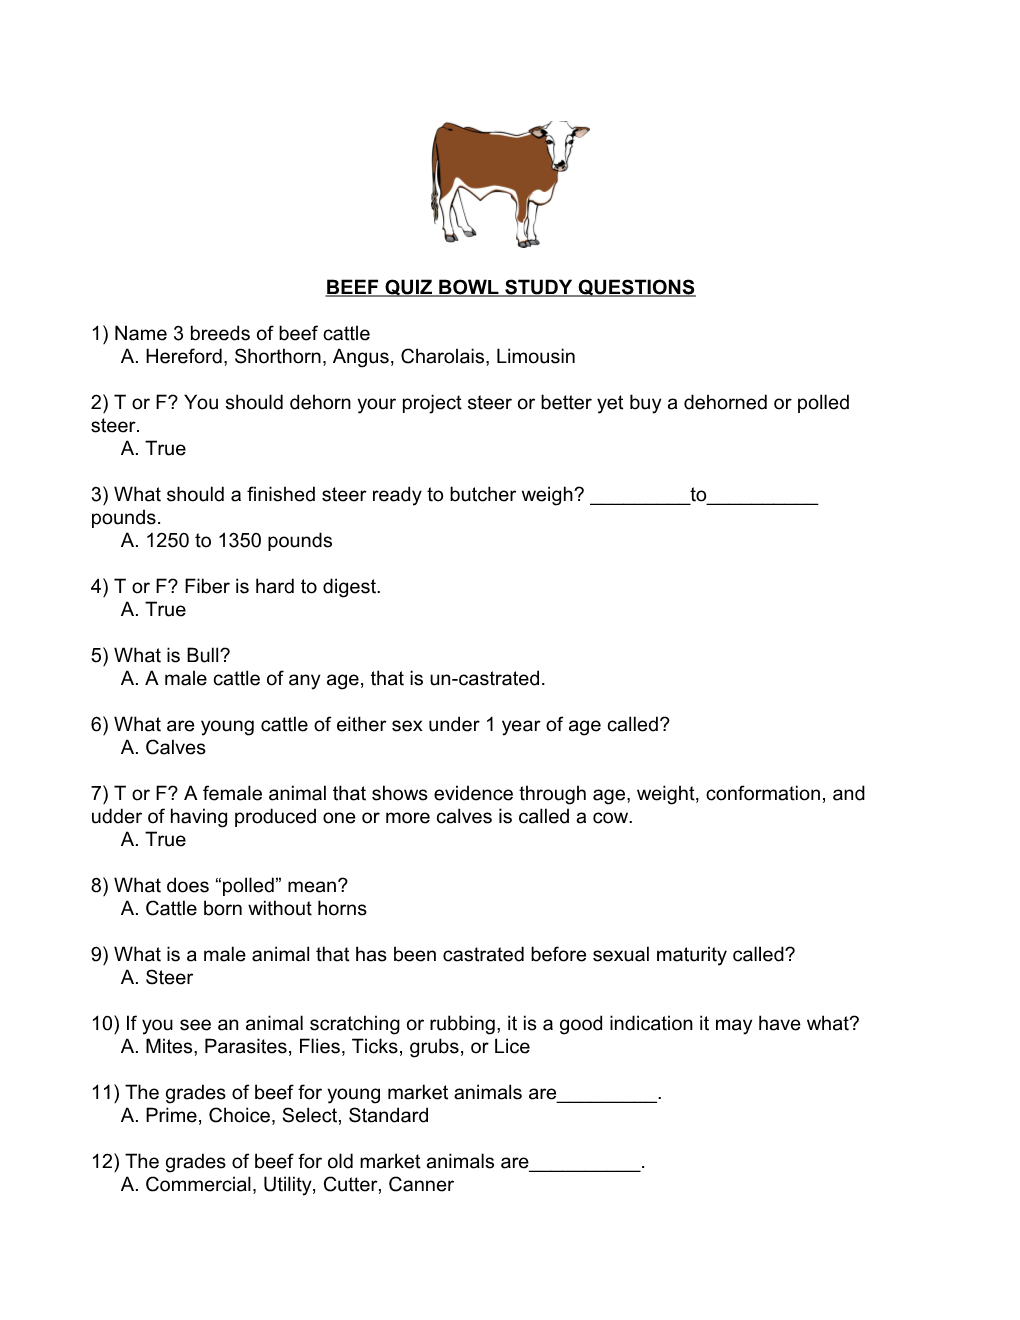 4-H Beef Learning Information